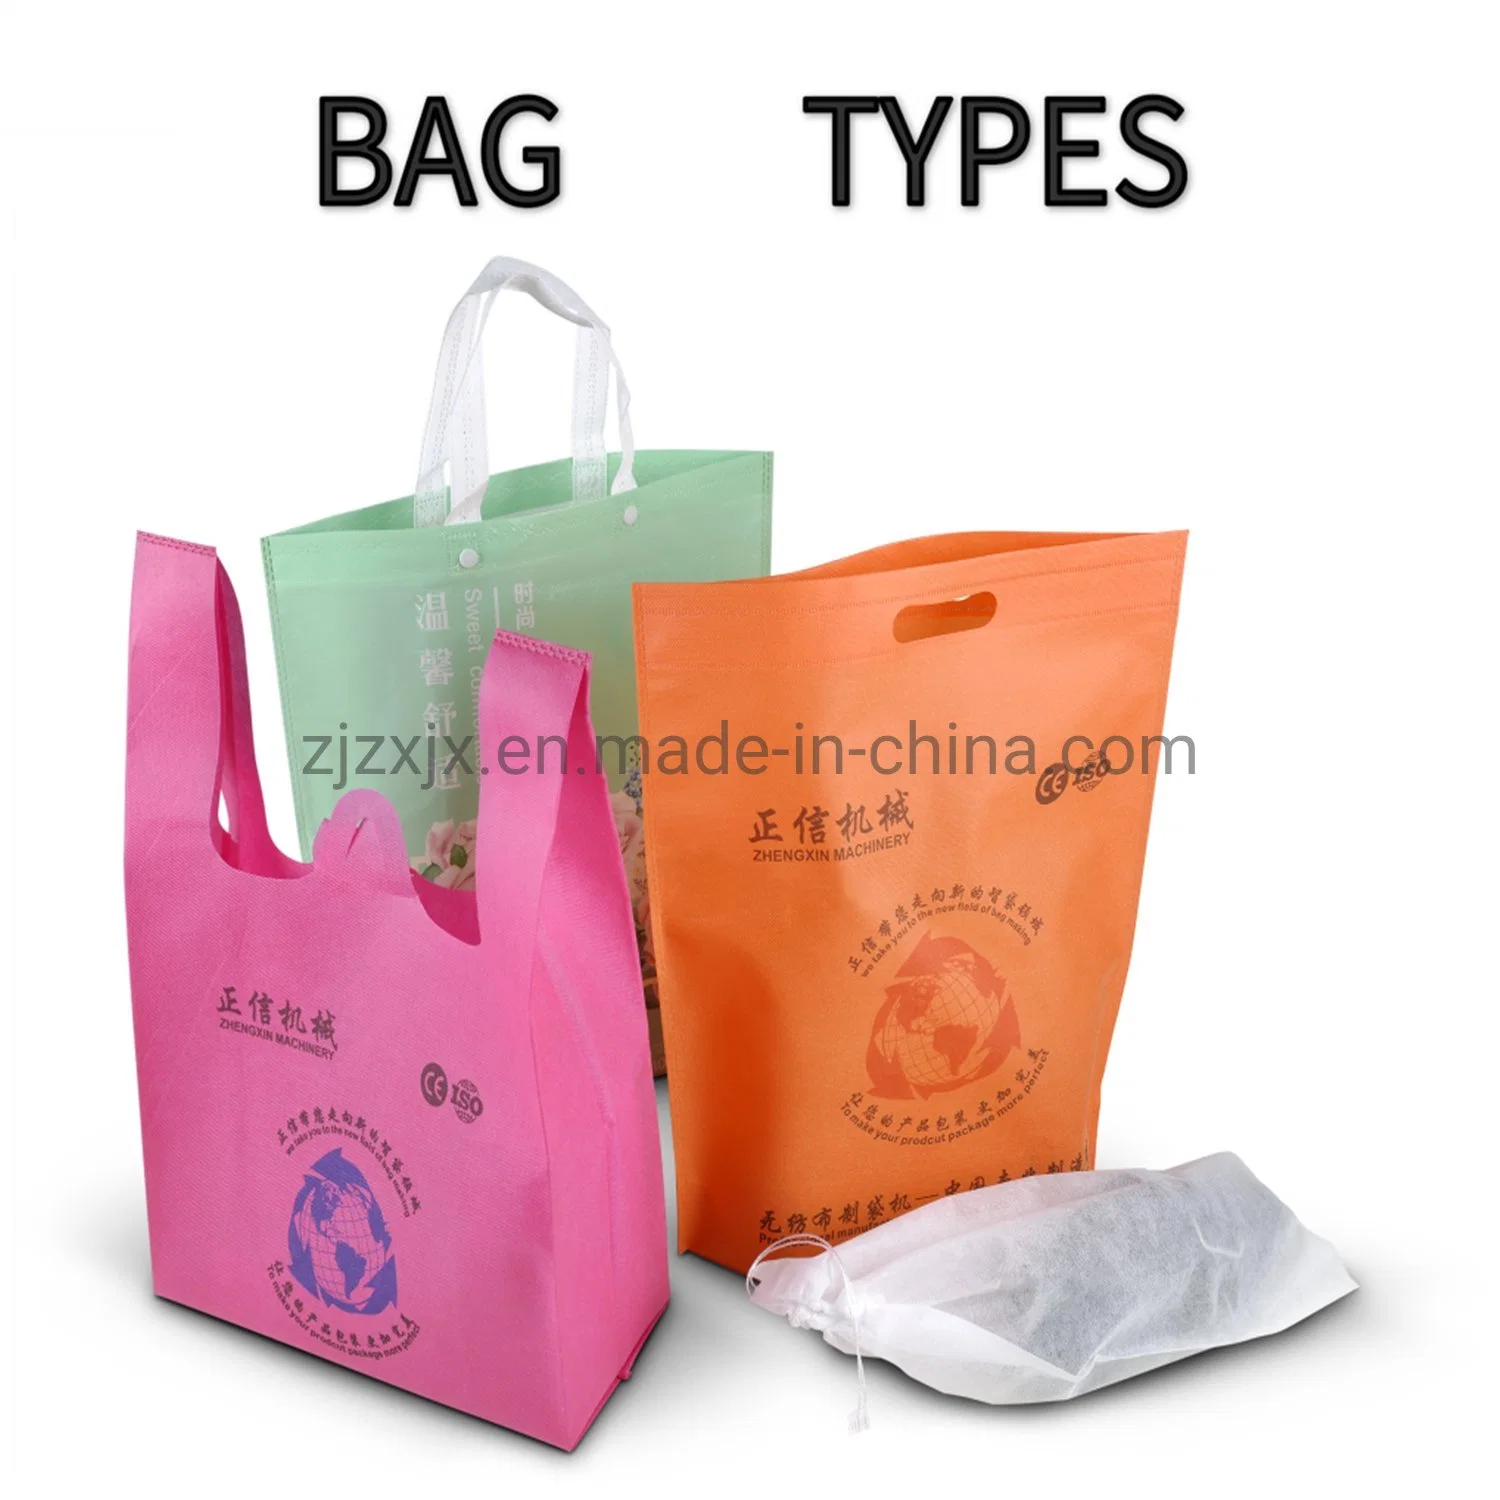 5% off New Product Wholesale Hand Sewing Non Woven Bag with Logo, Non Woven Bag for Promotional Products, Tote Bag, Handbag Making Machine